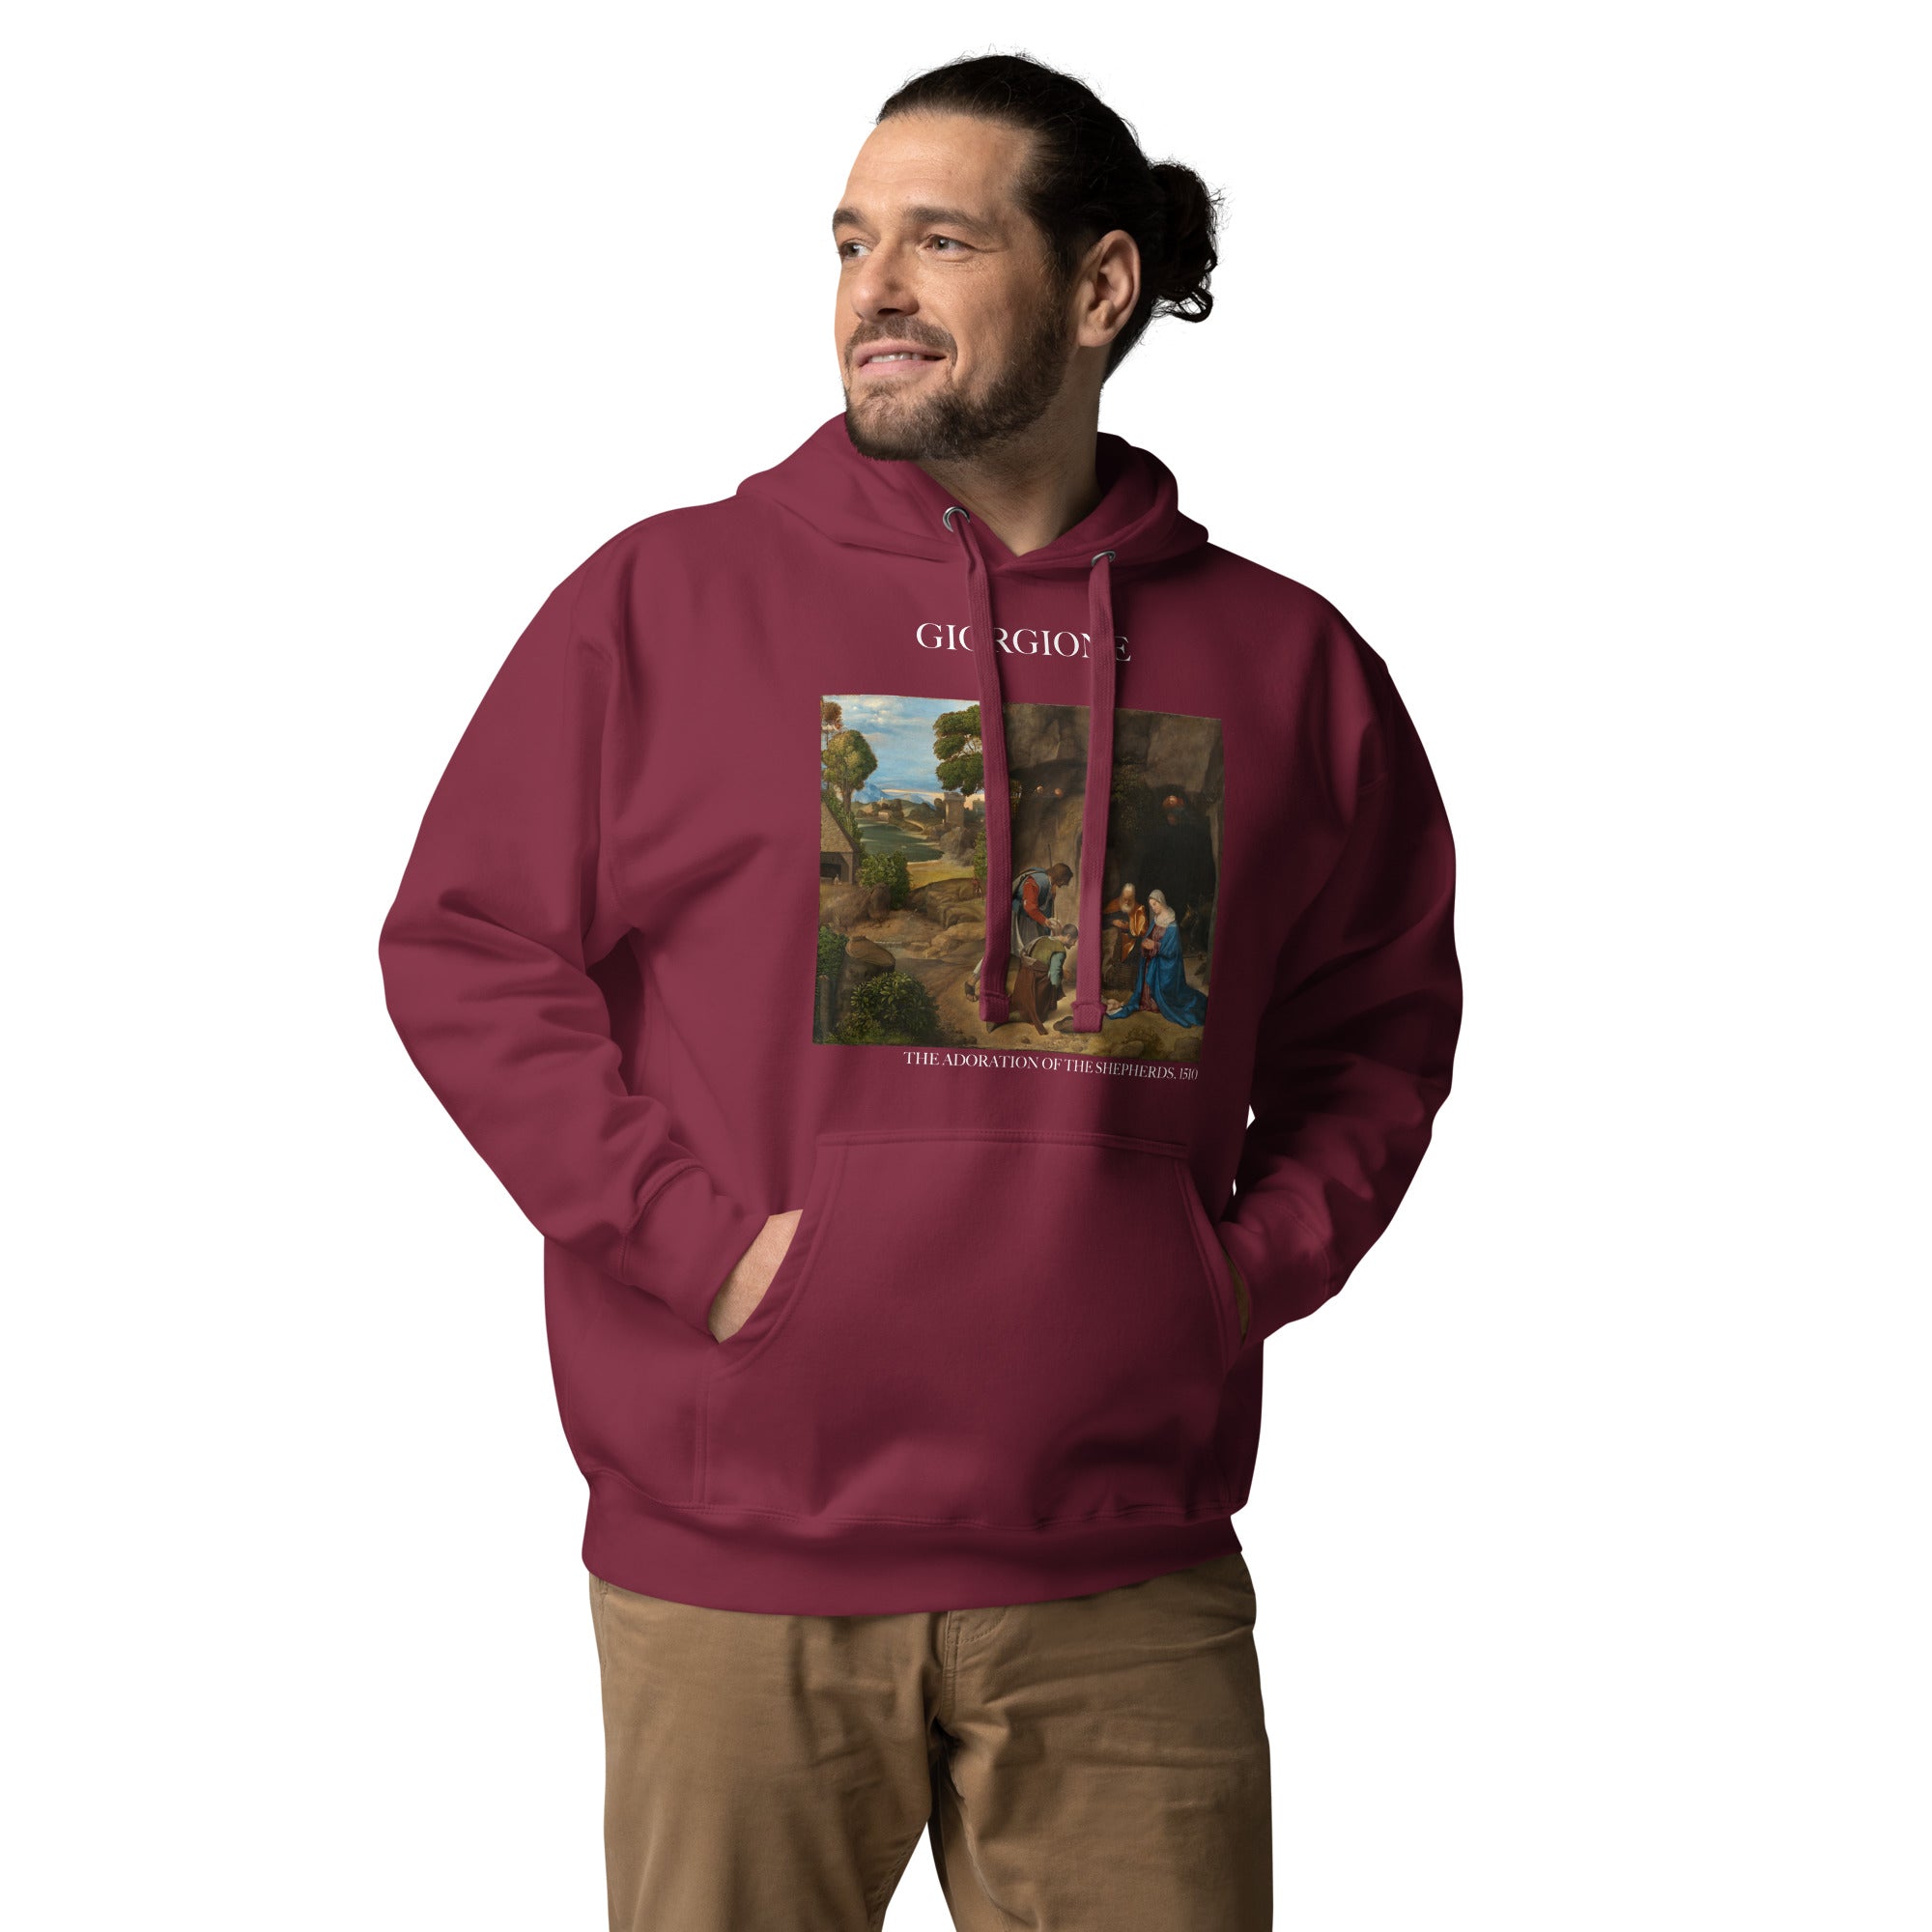 Giorgione 'The Adoration of the Shepherds' Famous Painting Hoodie | Unisex Premium Art Hoodie